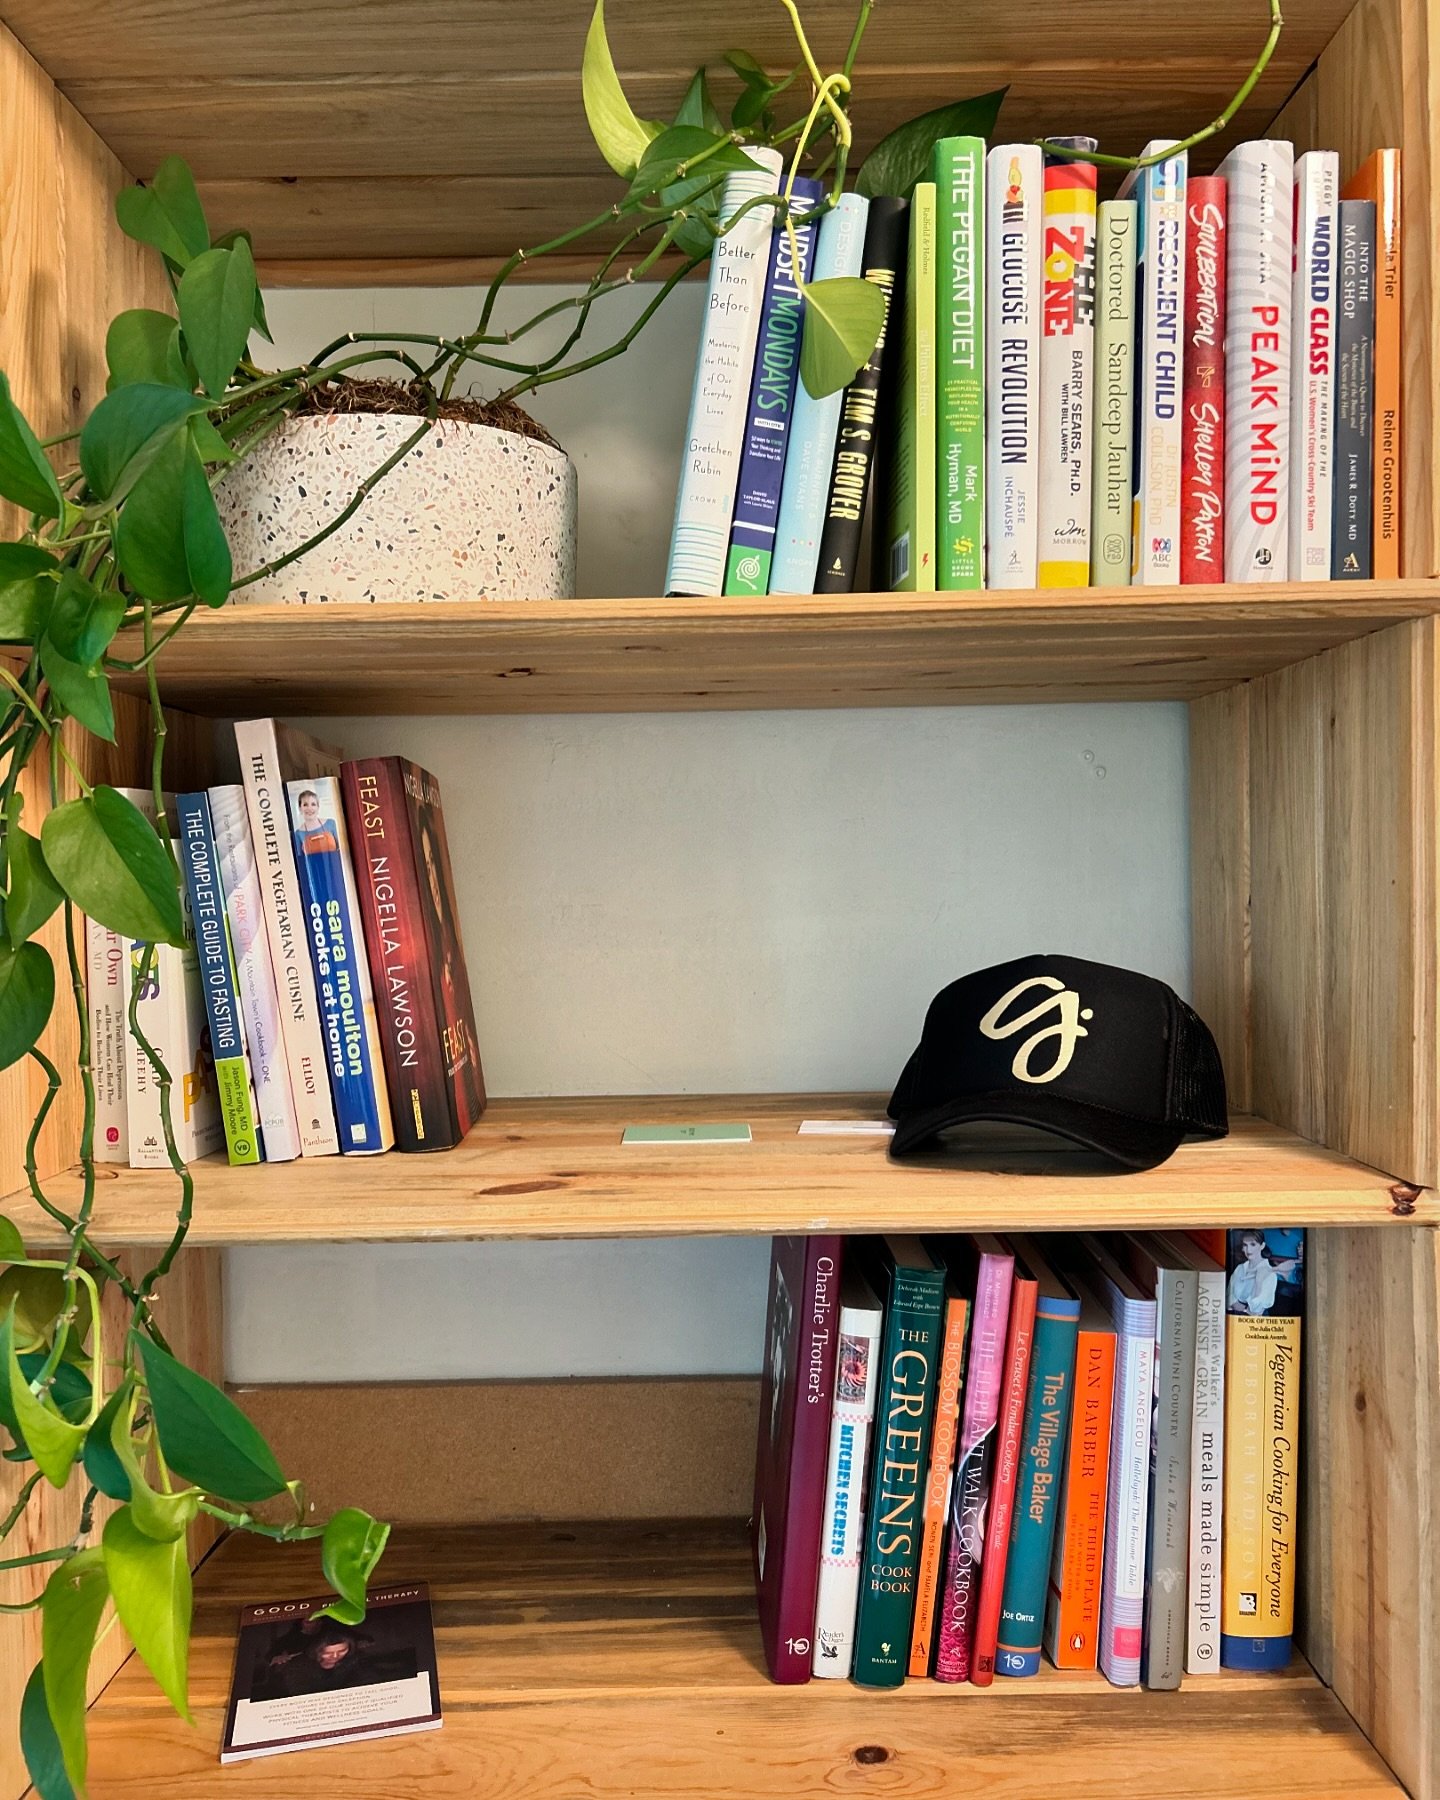 Looking for something new to cook or read? We&rsquo;ve gathered a collection at the studio. Feel free to borrow whatever peaks your interest. 

#books #healthylifestyle #goodmovementstudio